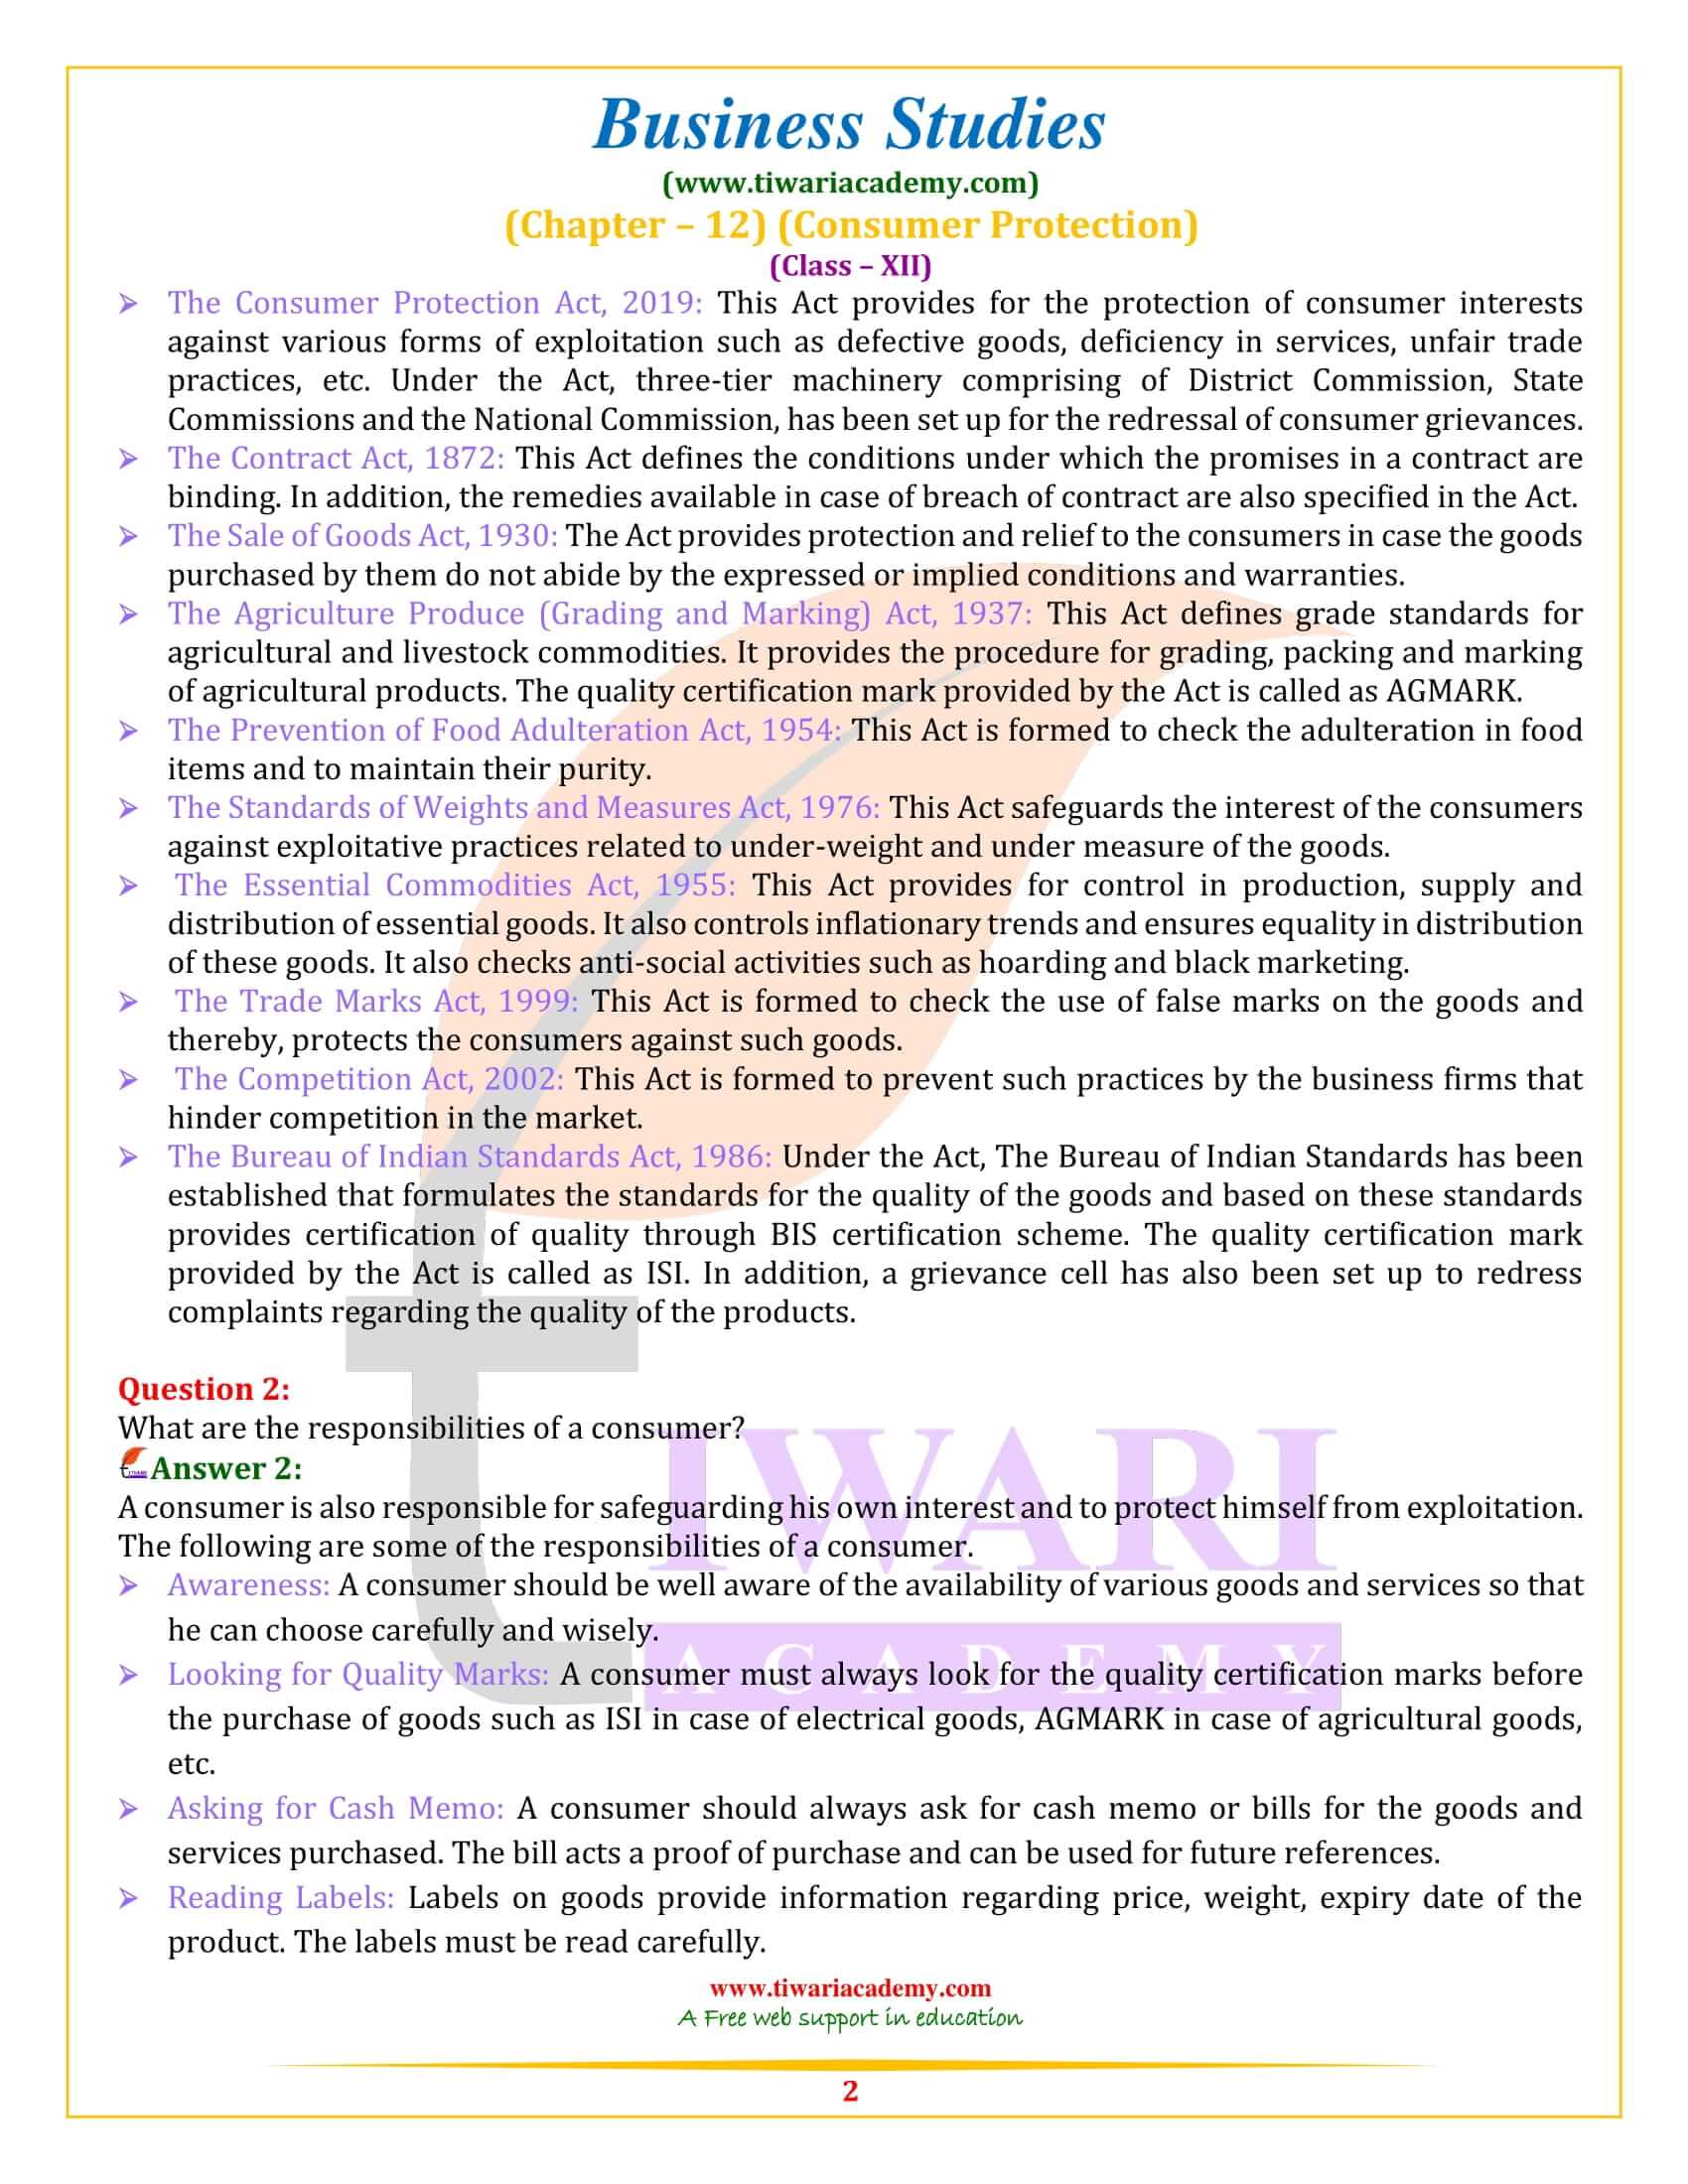 NCERT Solutions for Class 12 Business Studies Chapter 12